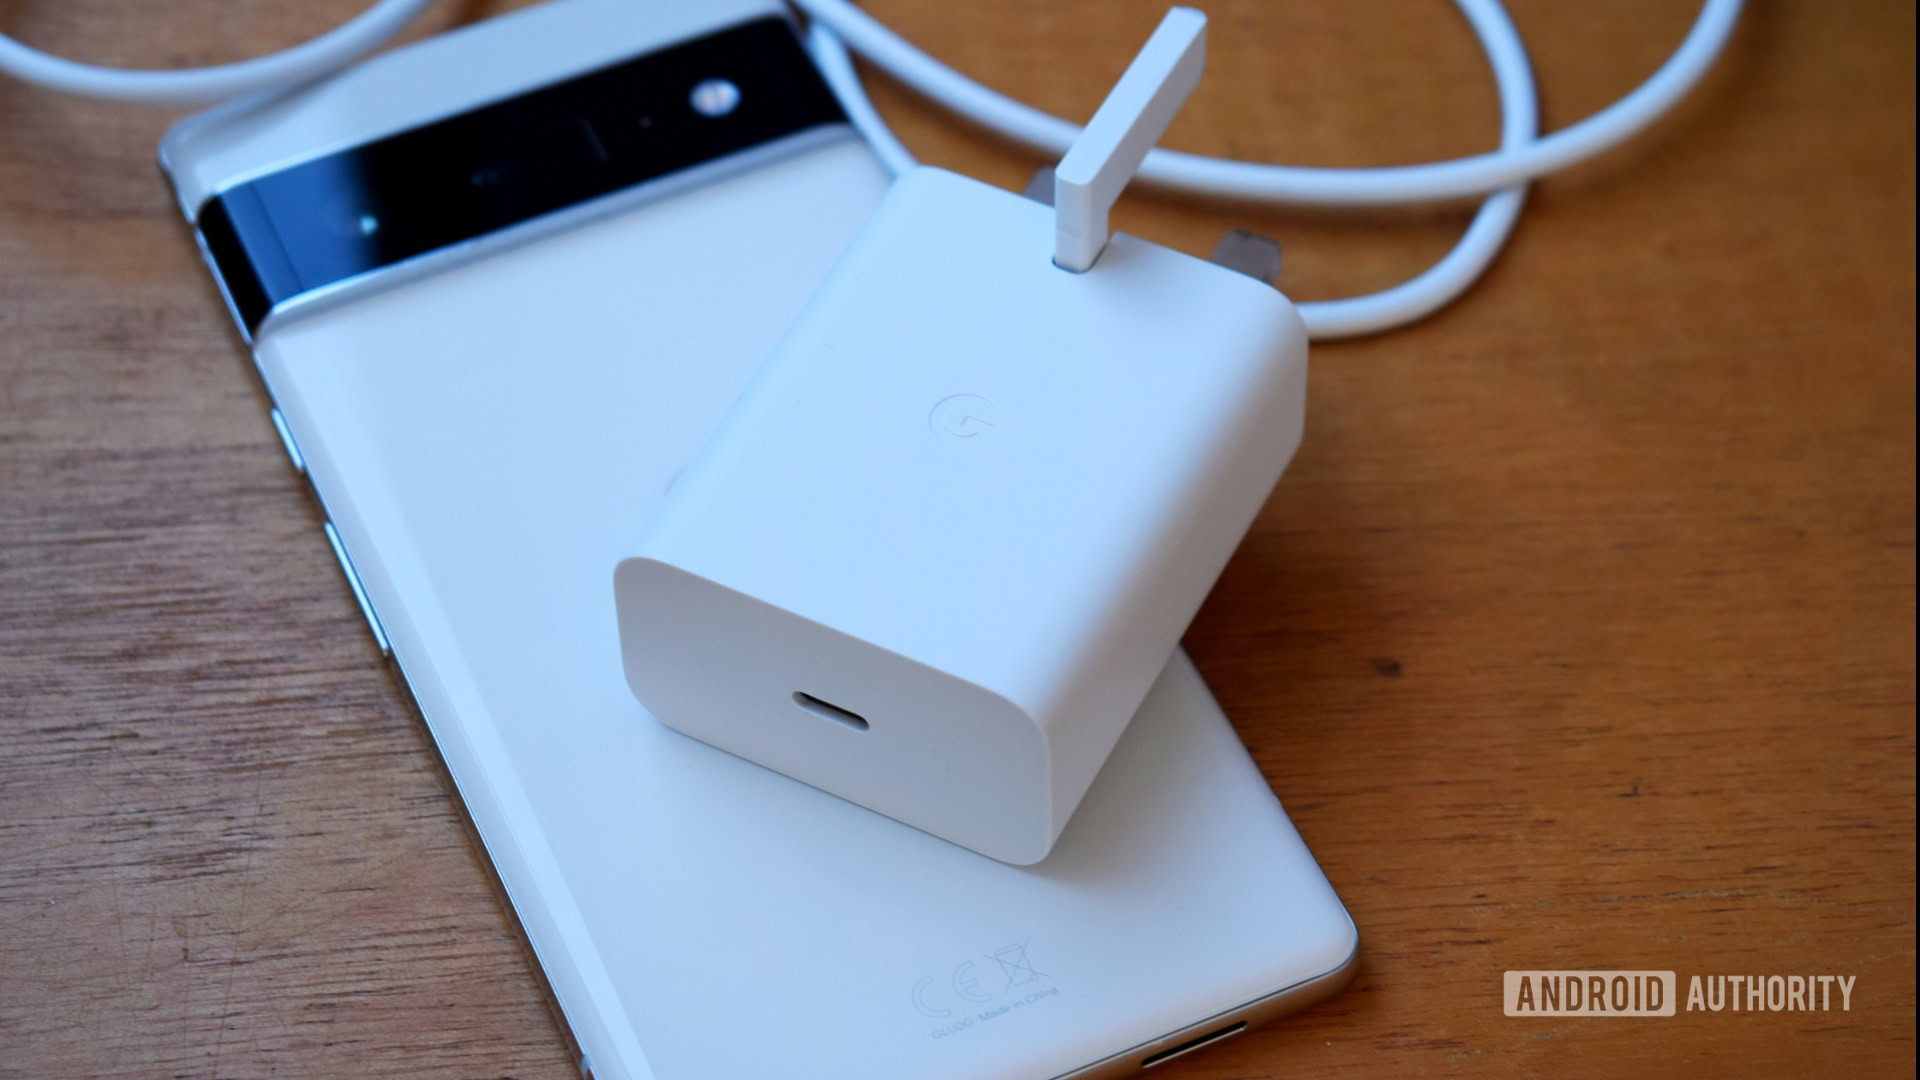 https://www.androidauthority.com/wp-content/uploads/2021/11/Google-Pixel-6-30W-charger.jpg